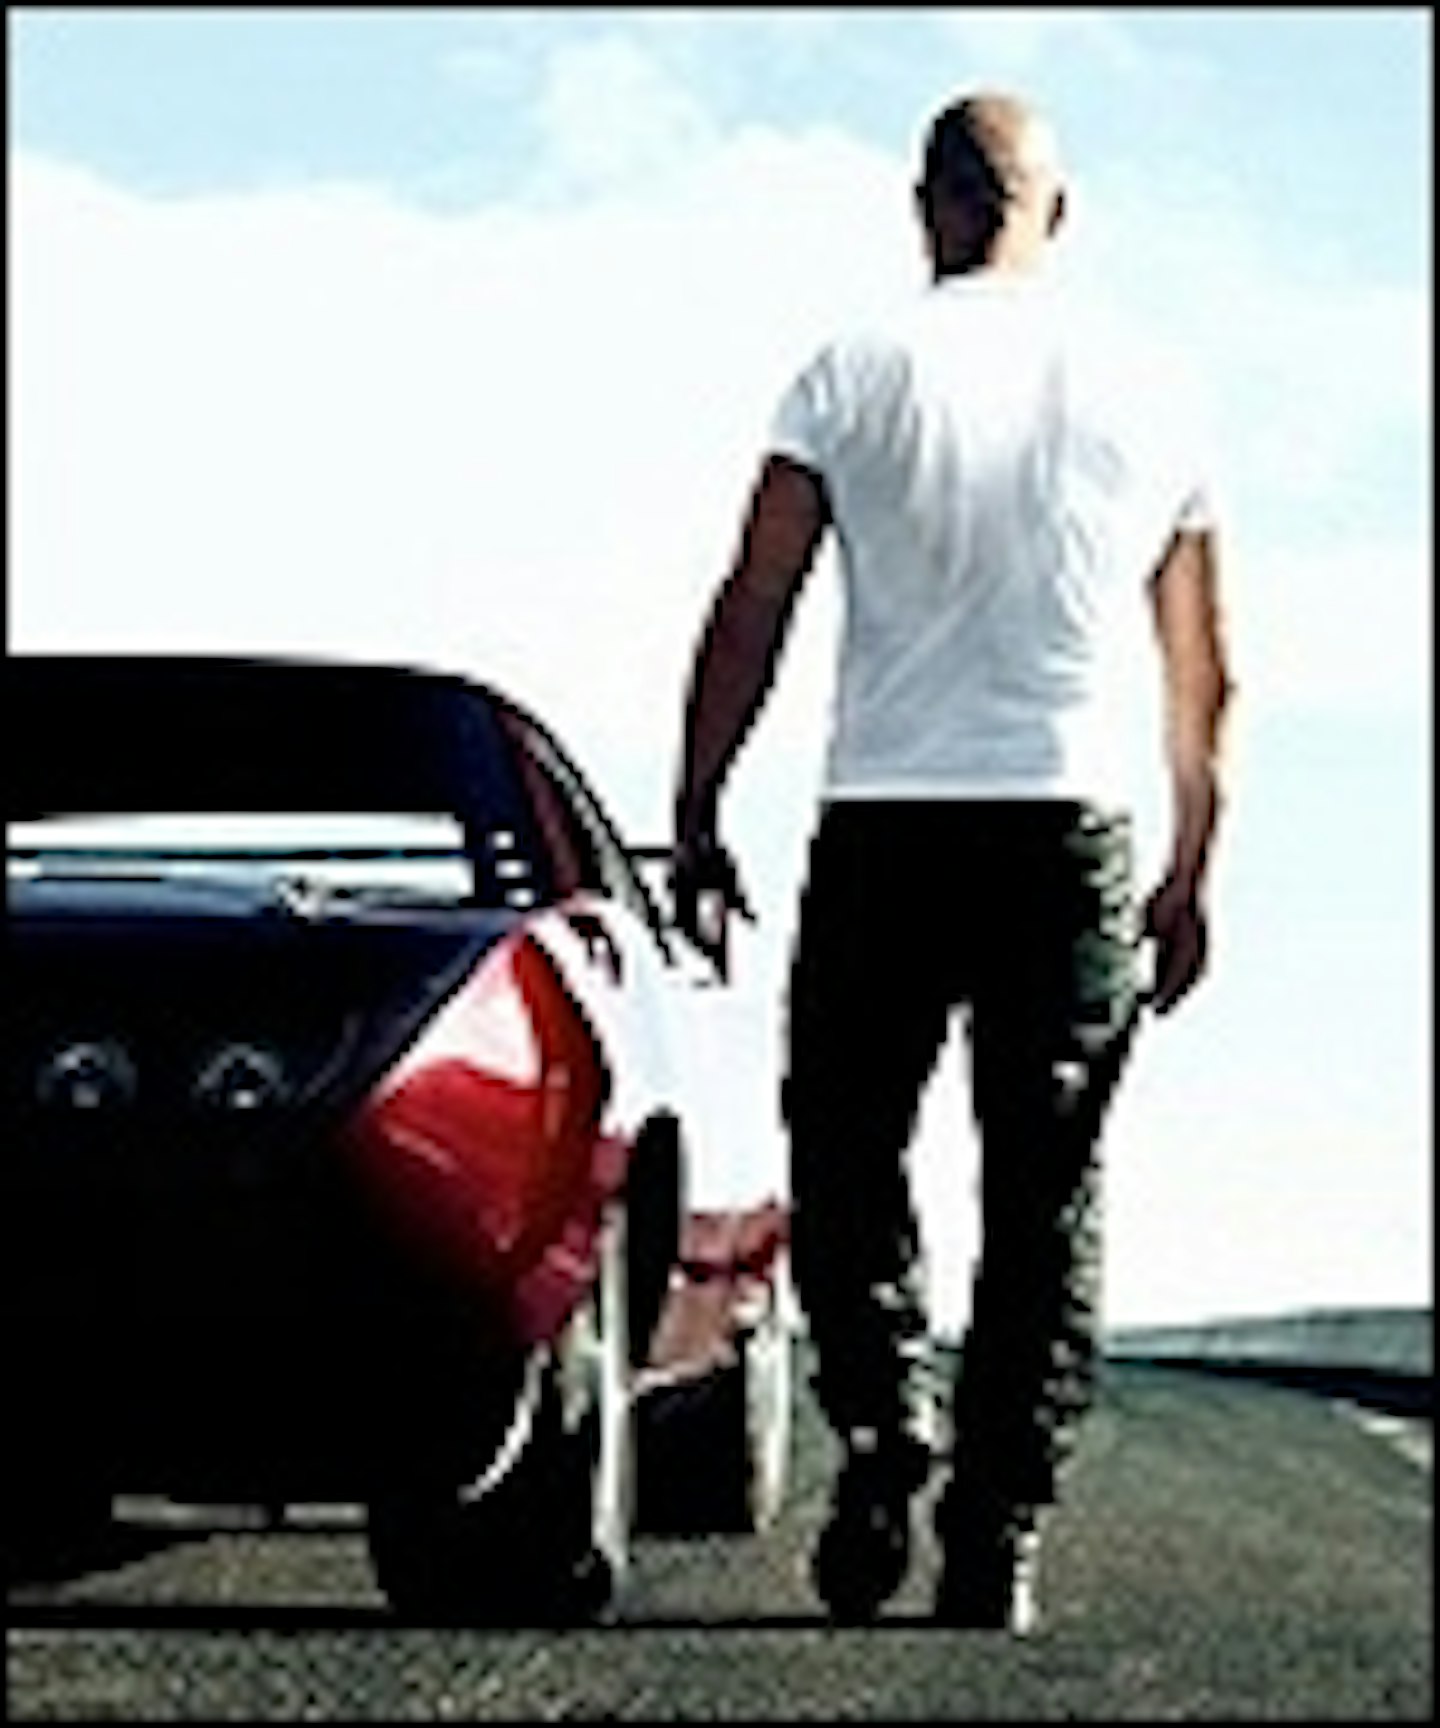 New Fast & Furious 6 Trailer Arrives